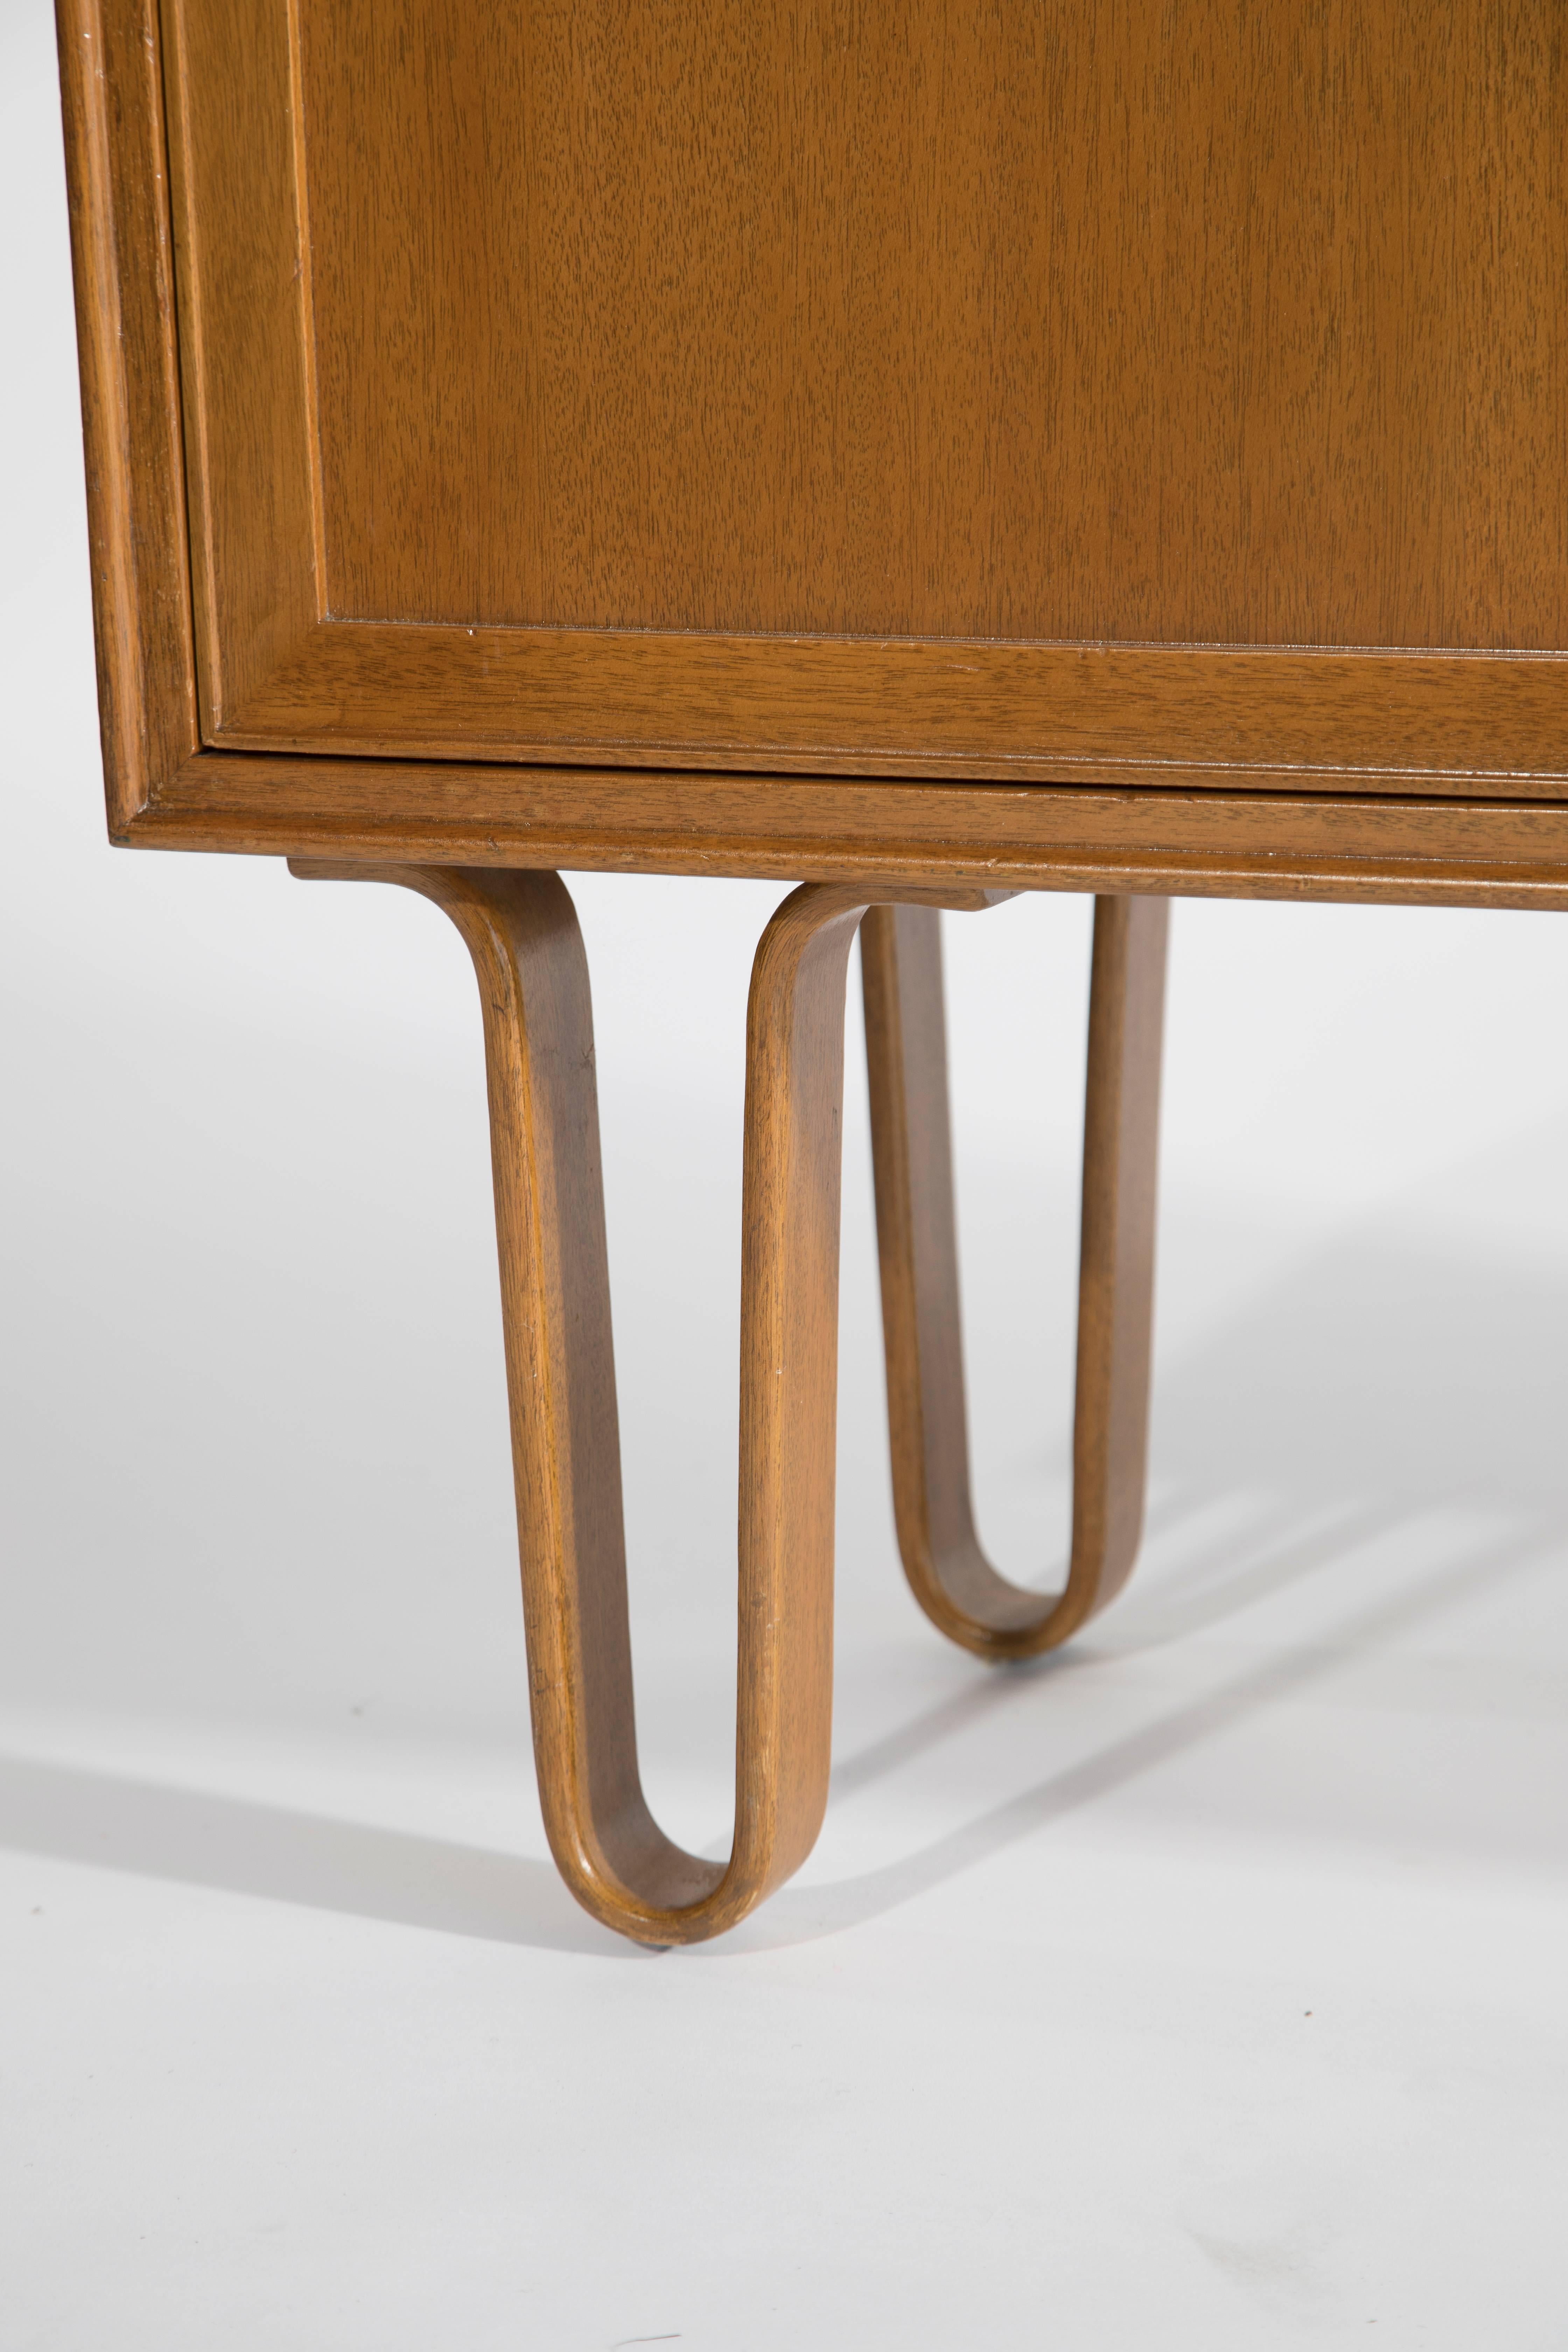 Bleached Edward Wormley for Dunbar Cabinet on Hairpin Legs, Model 4604, 1940s